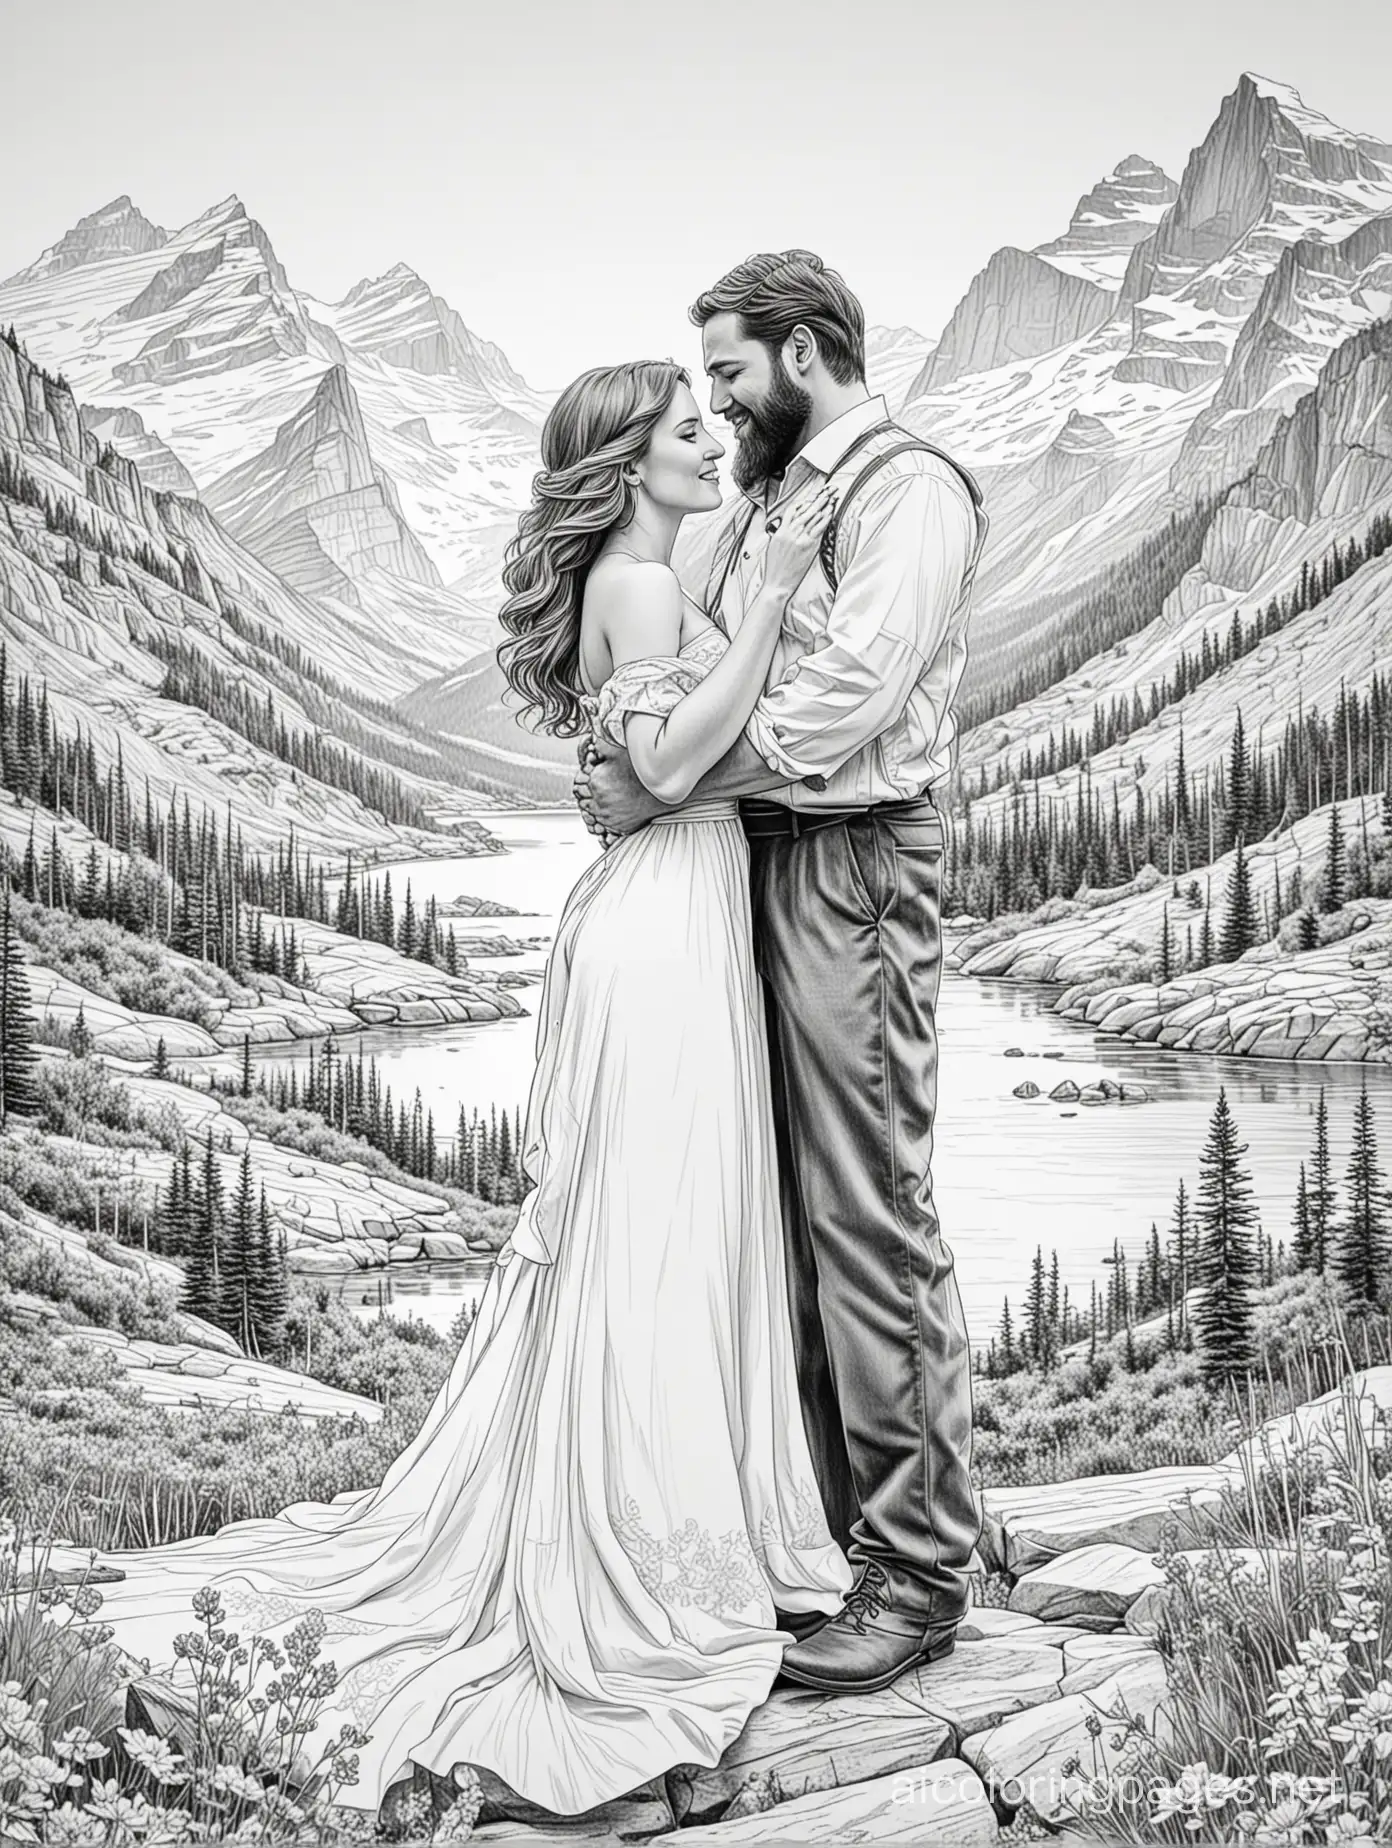 Line art. Glacier park Montana married couple on honeymoon in love, magical sexy woman,sexy wife, bearded husband
, Coloring Page, black and white, line art, white background, Simplicity, Ample White Space. The background of the coloring page is plain white to make it easy for young children to color within the lines. The outlines of all the subjects are easy to distinguish, making it simple for kids to color without too much difficulty